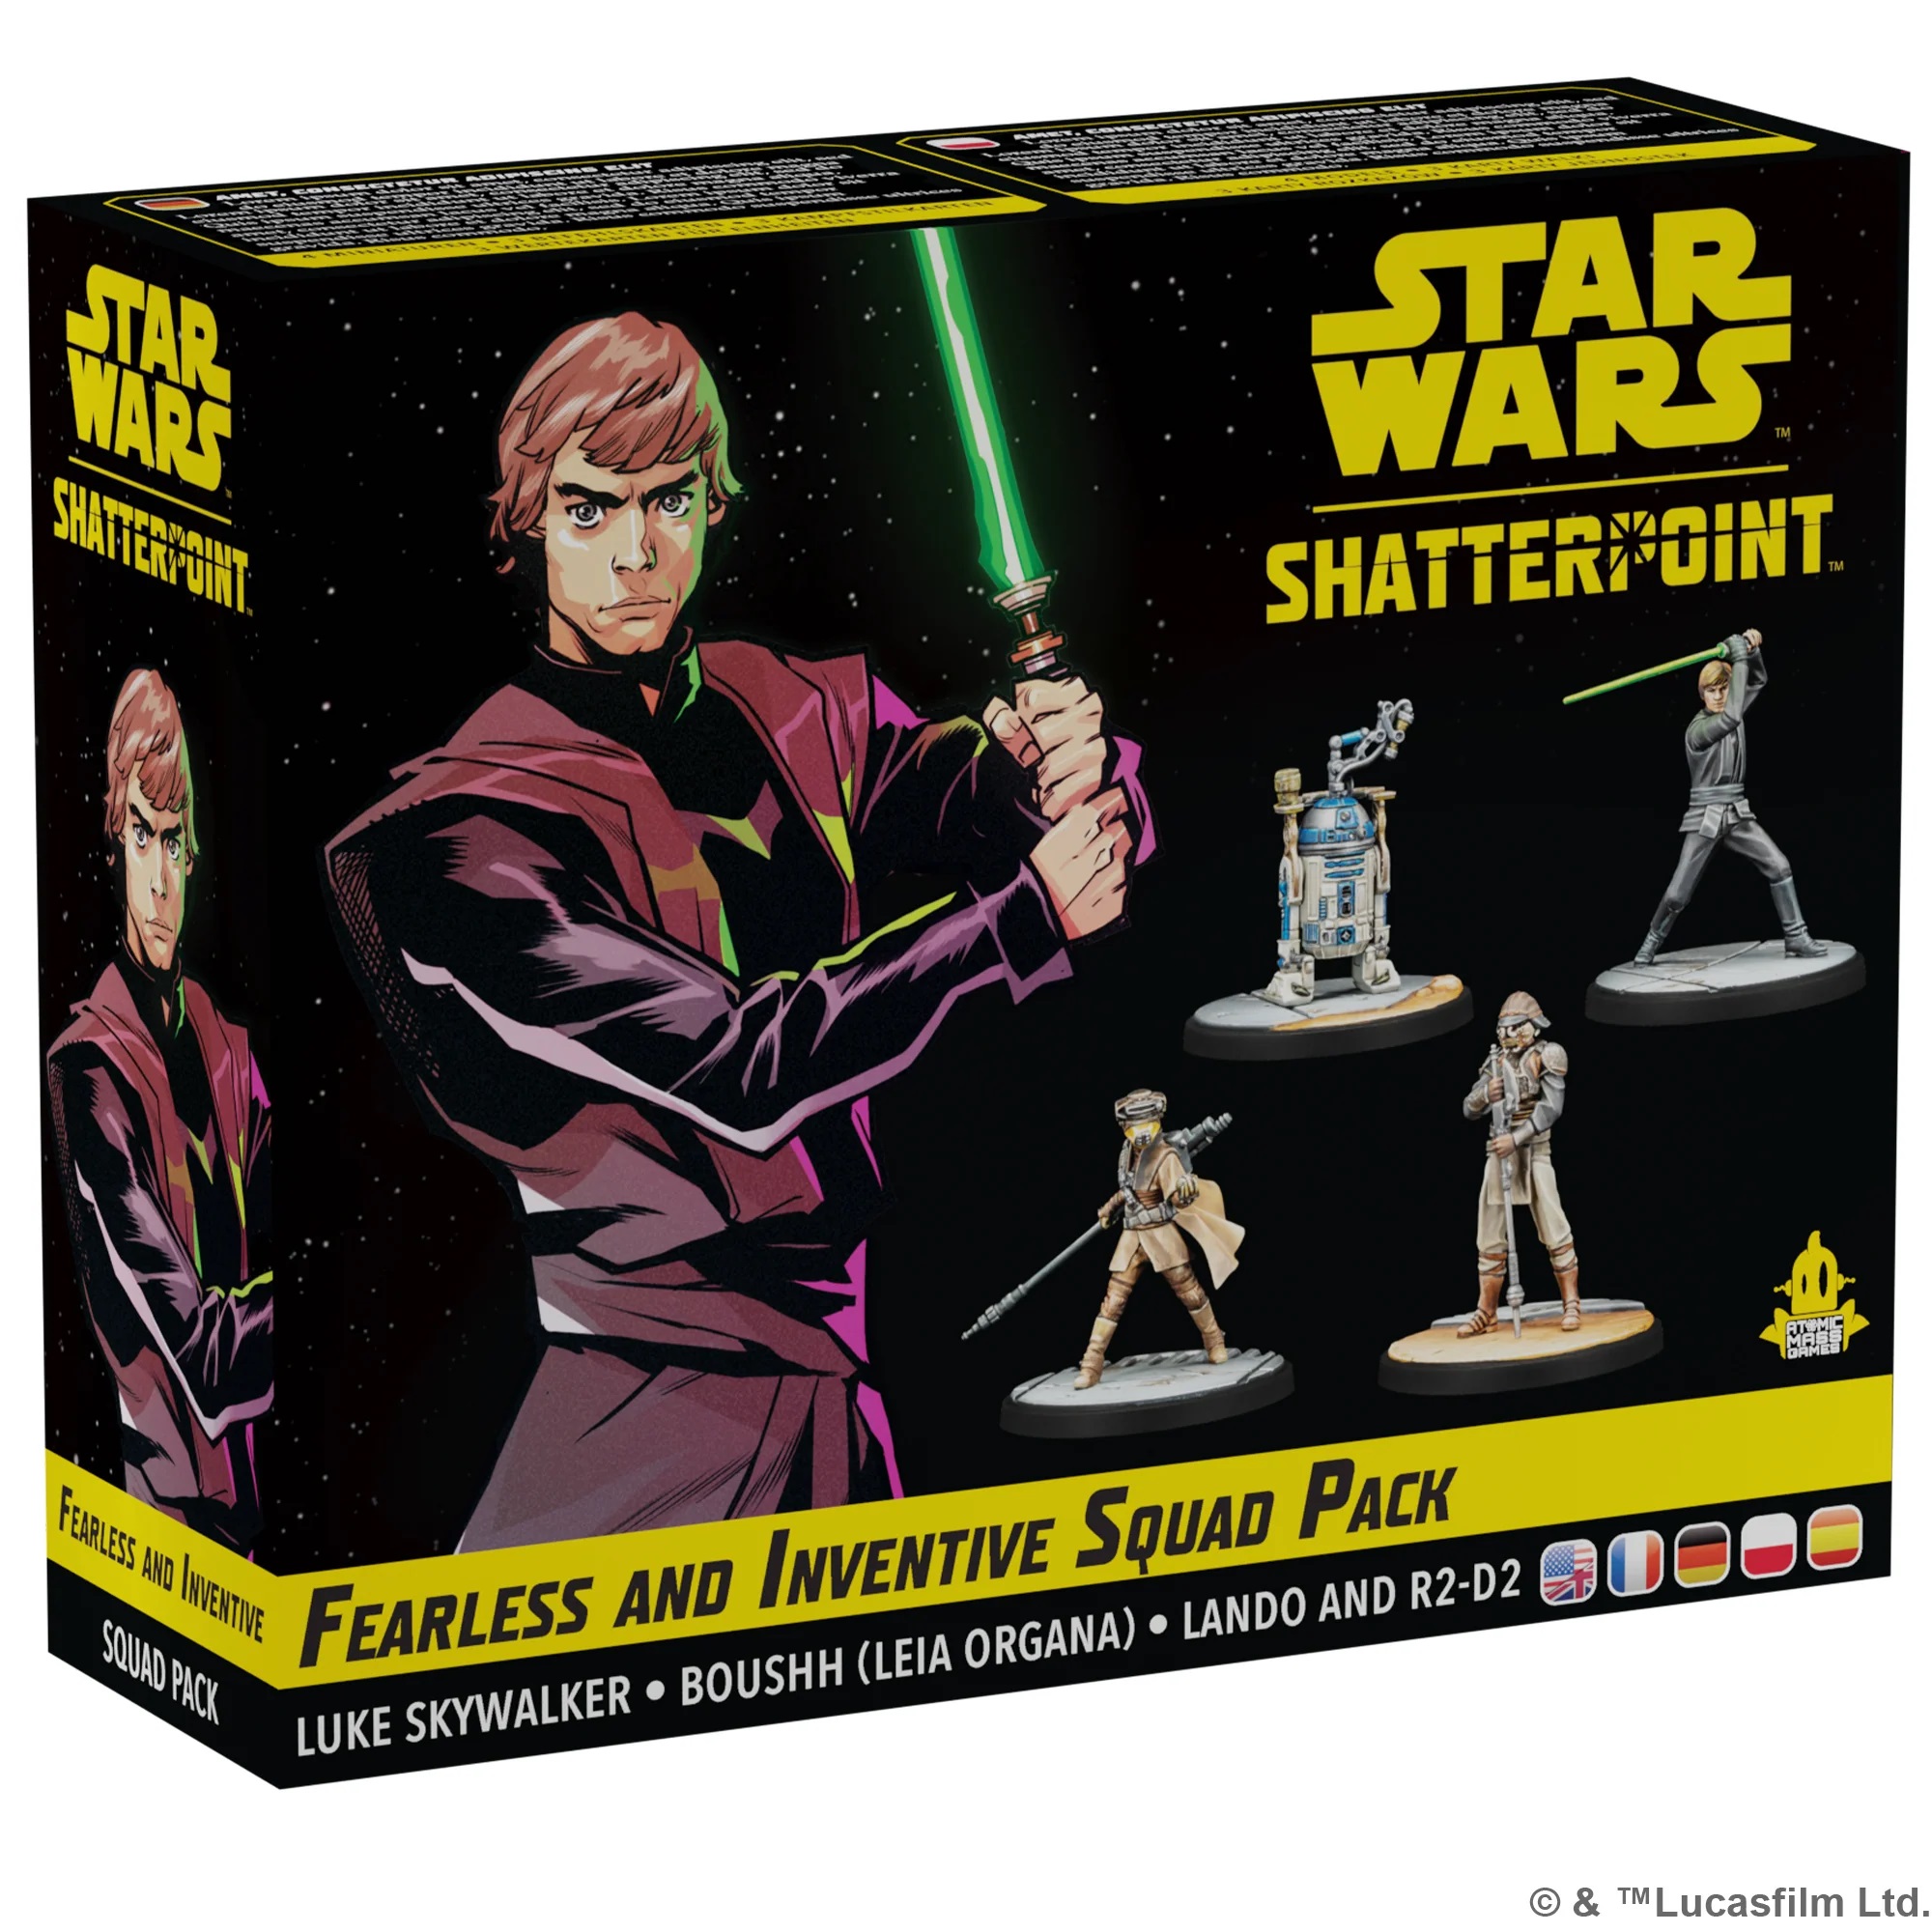 Fearless And Inventive Squad Pack - Star Wars Shatterpoint